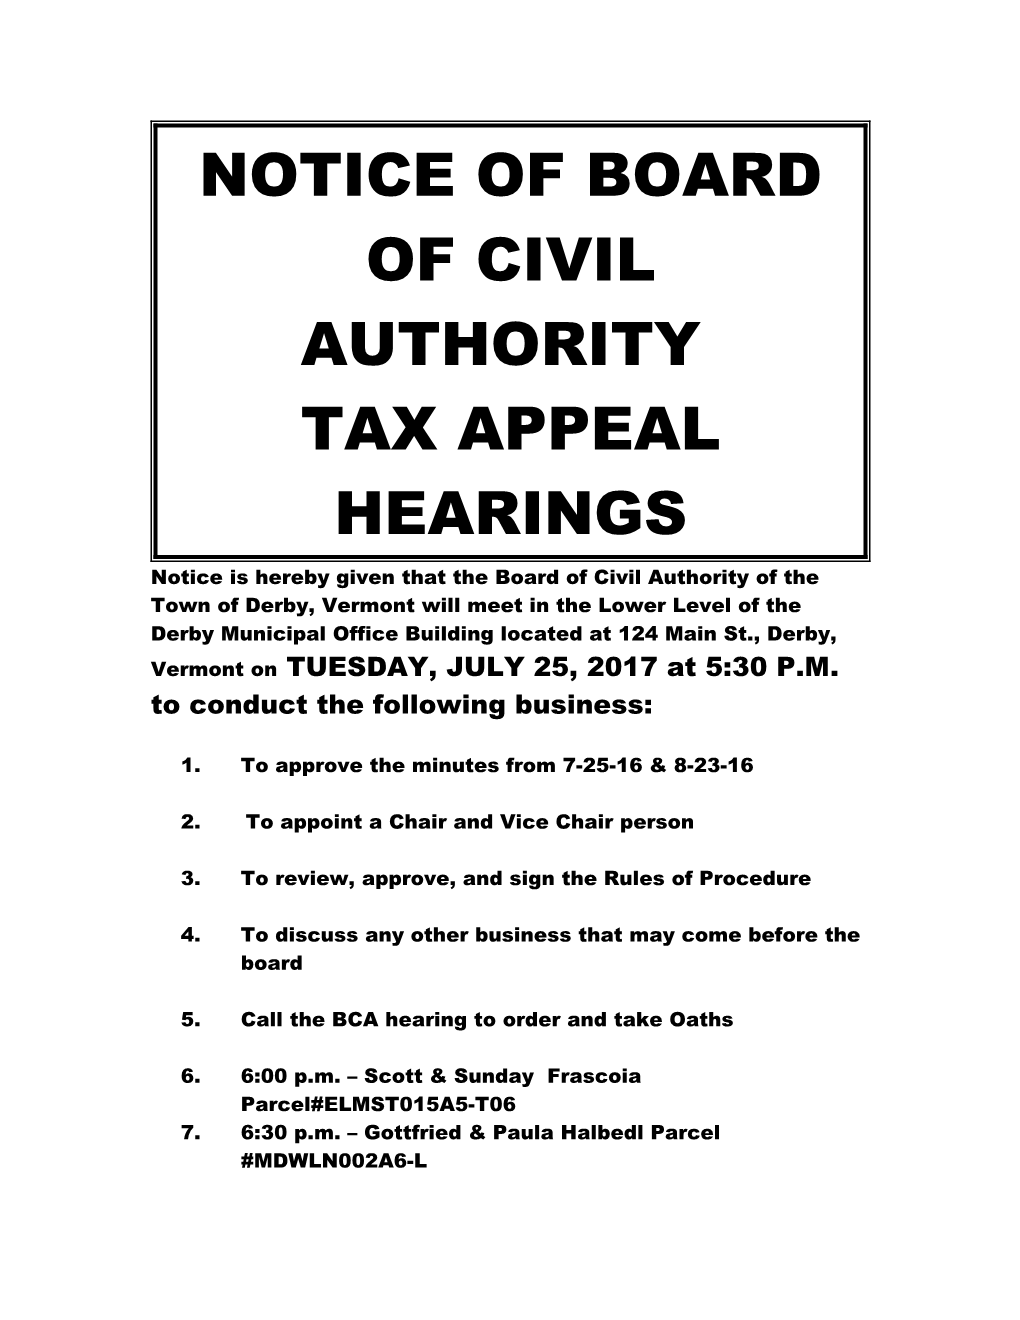 Notice of Board of Civil Authority Meeting